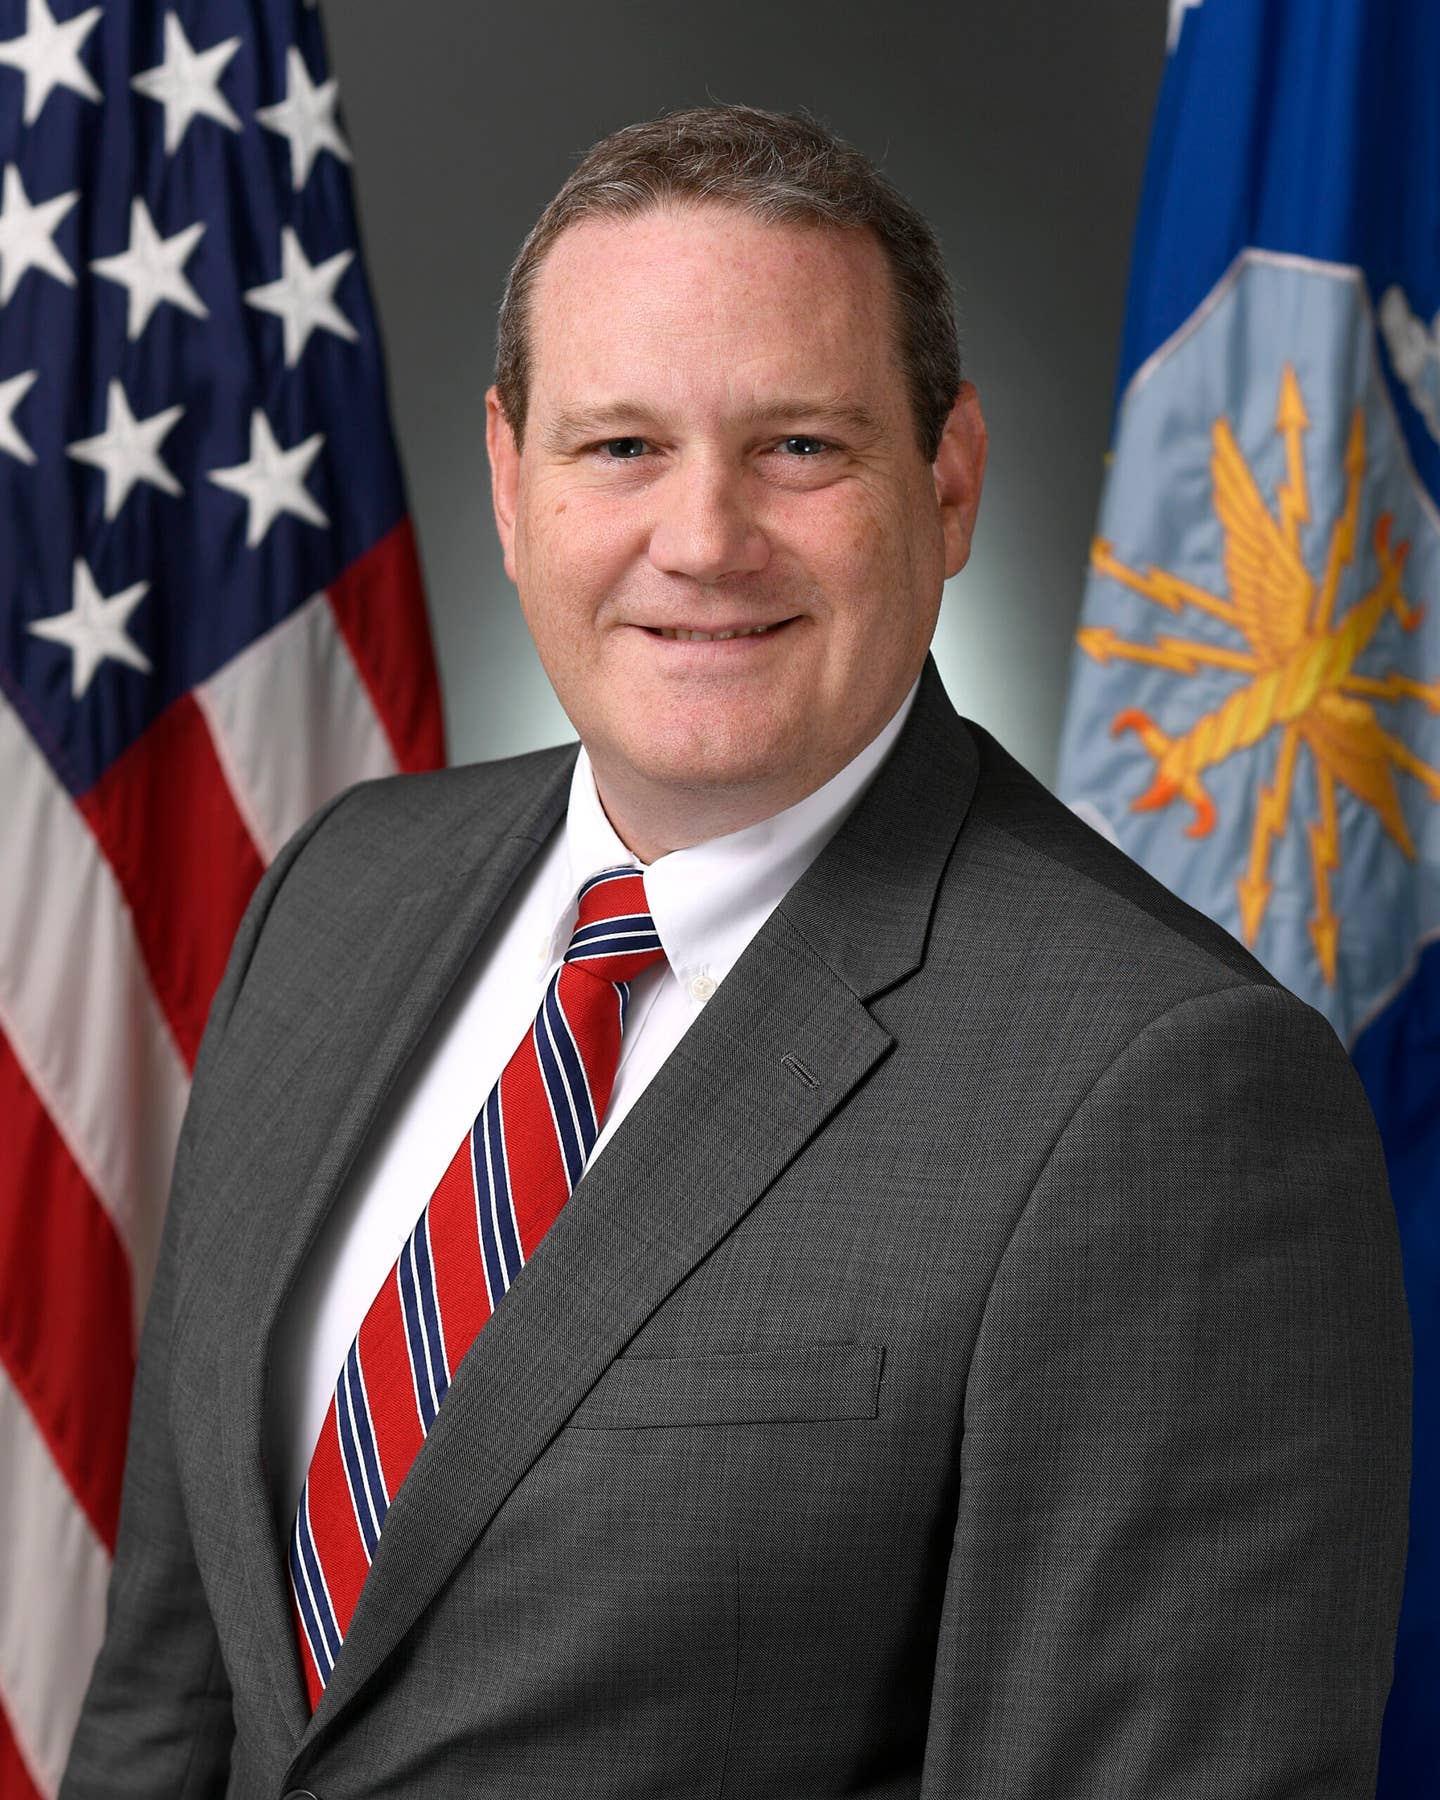 Andrew Hunter, the Assistant Secretary of the Air Force for Acquisition, Technology and Logistics, is the Air Force’s Service Acquisition Executive, overseeing research, development, and acquisition activities. <em>U.S. Air Force photo by Staff Sgt. Chad Trujilo</em>